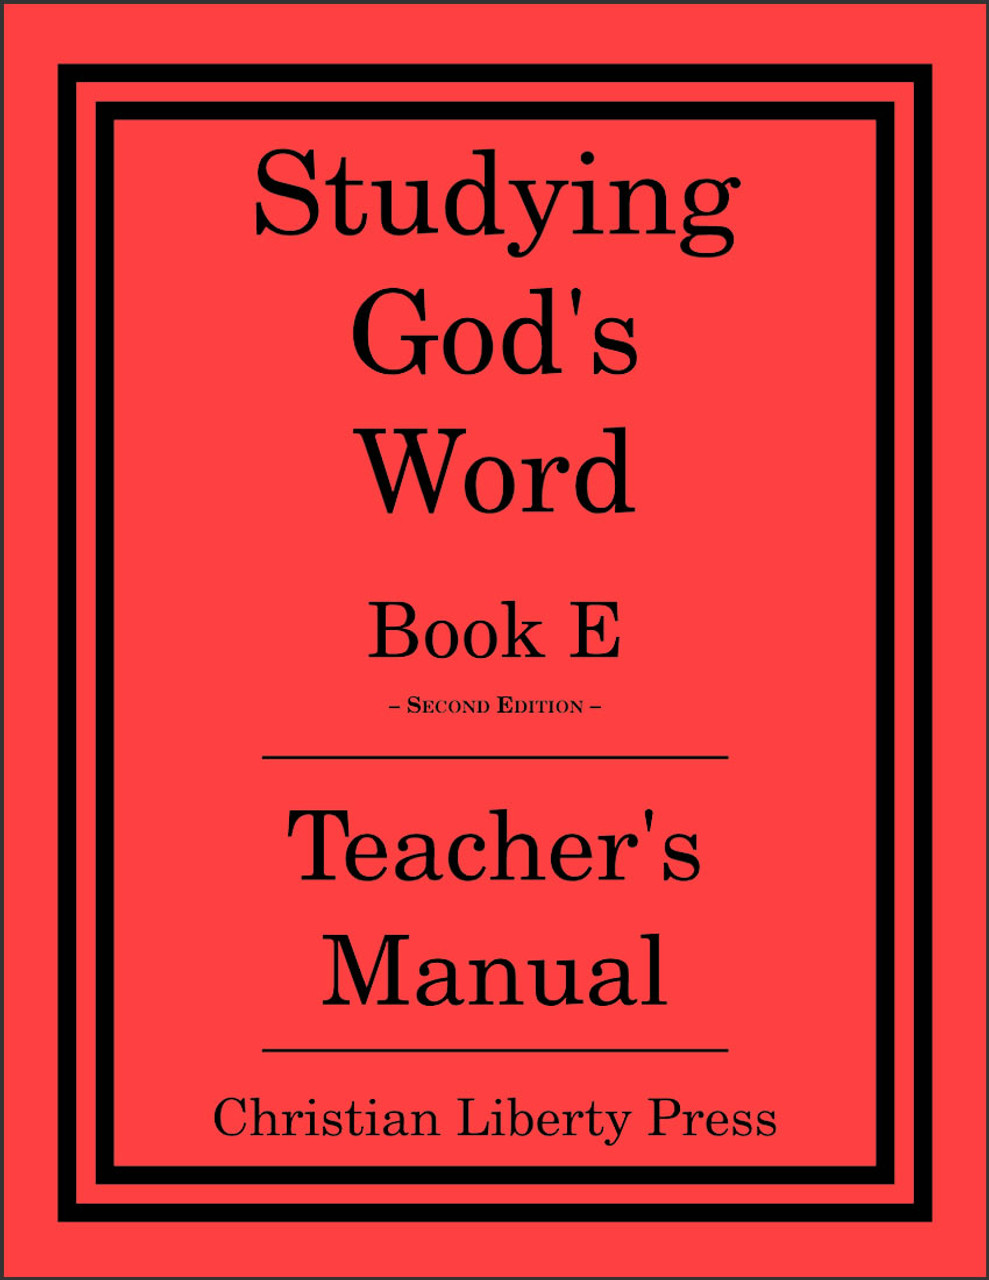 Studying God's Word Book E: Genesis to Ruth Teacher's Manual